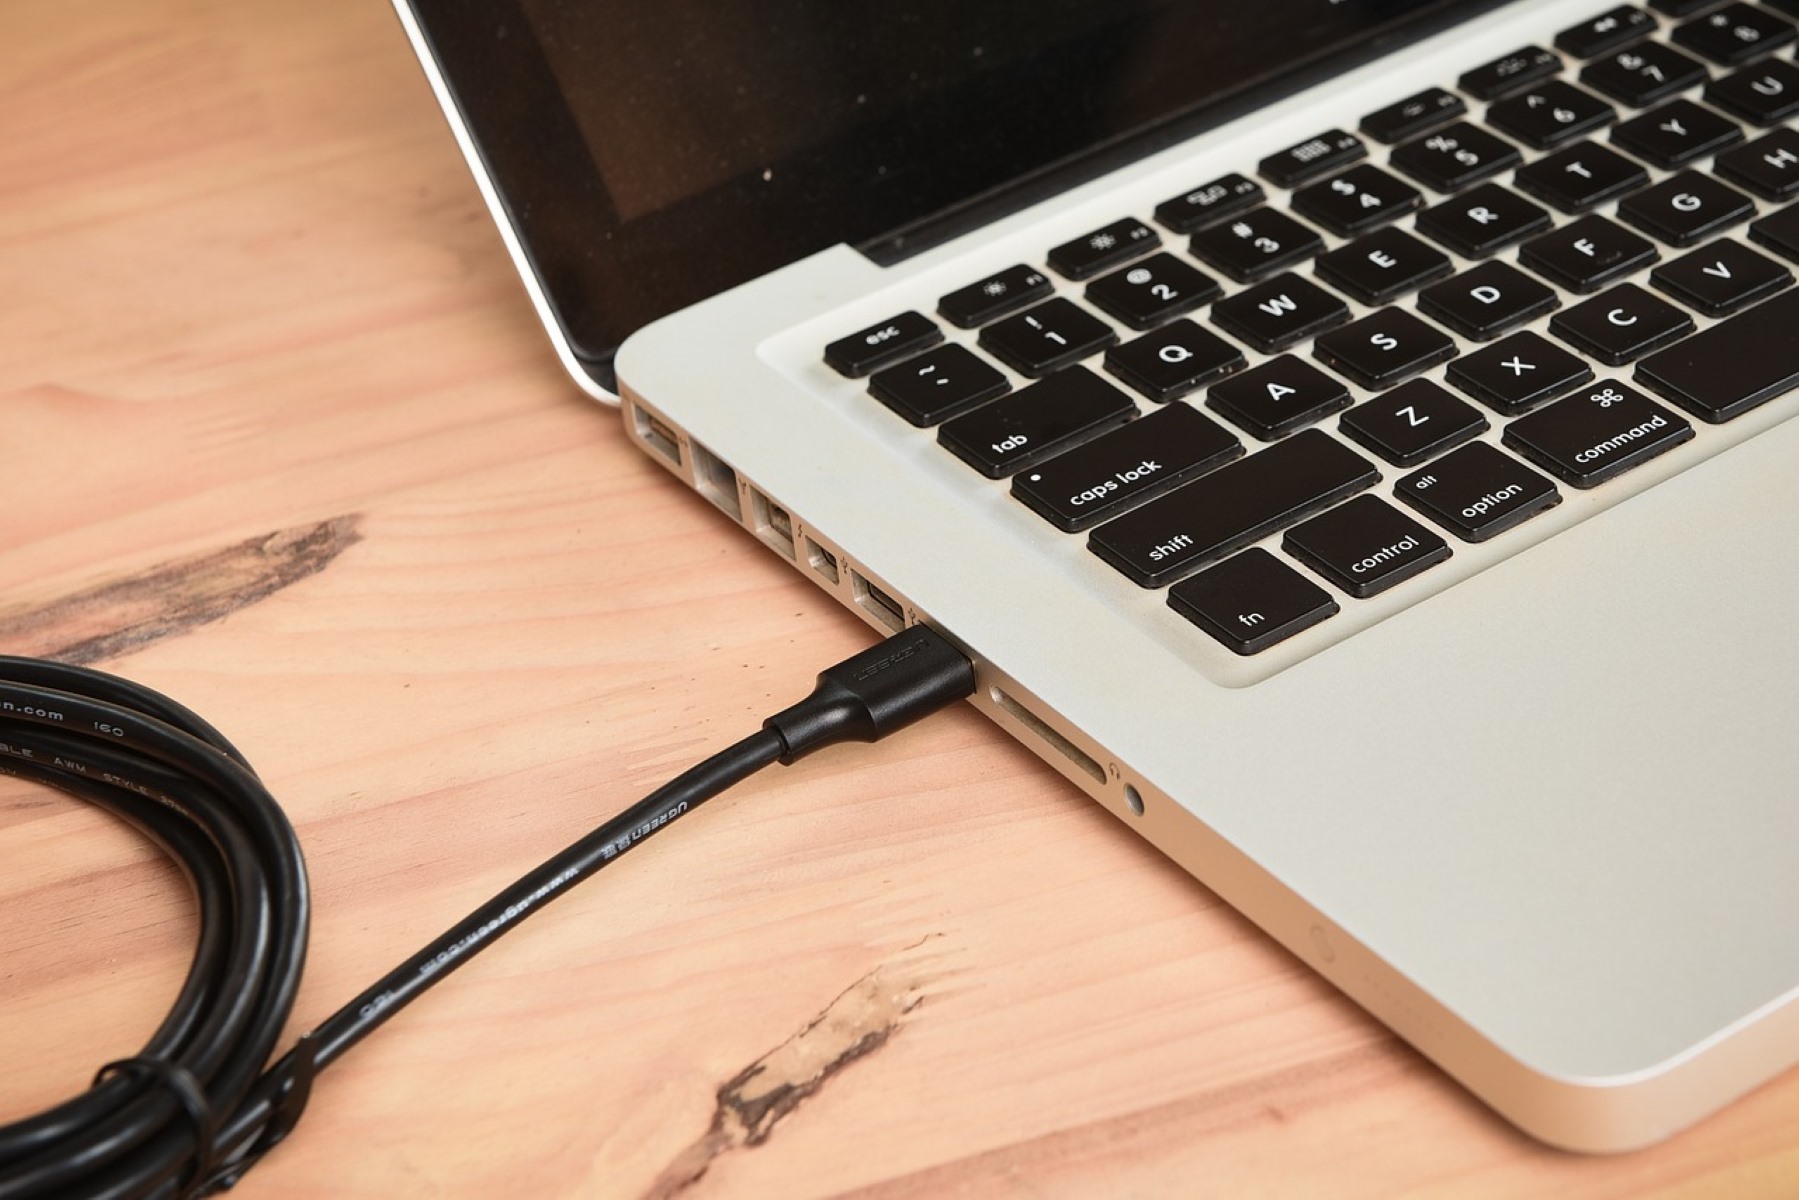 how-to-connect-ethernet-cable-to-laptop-without-ethernet-port